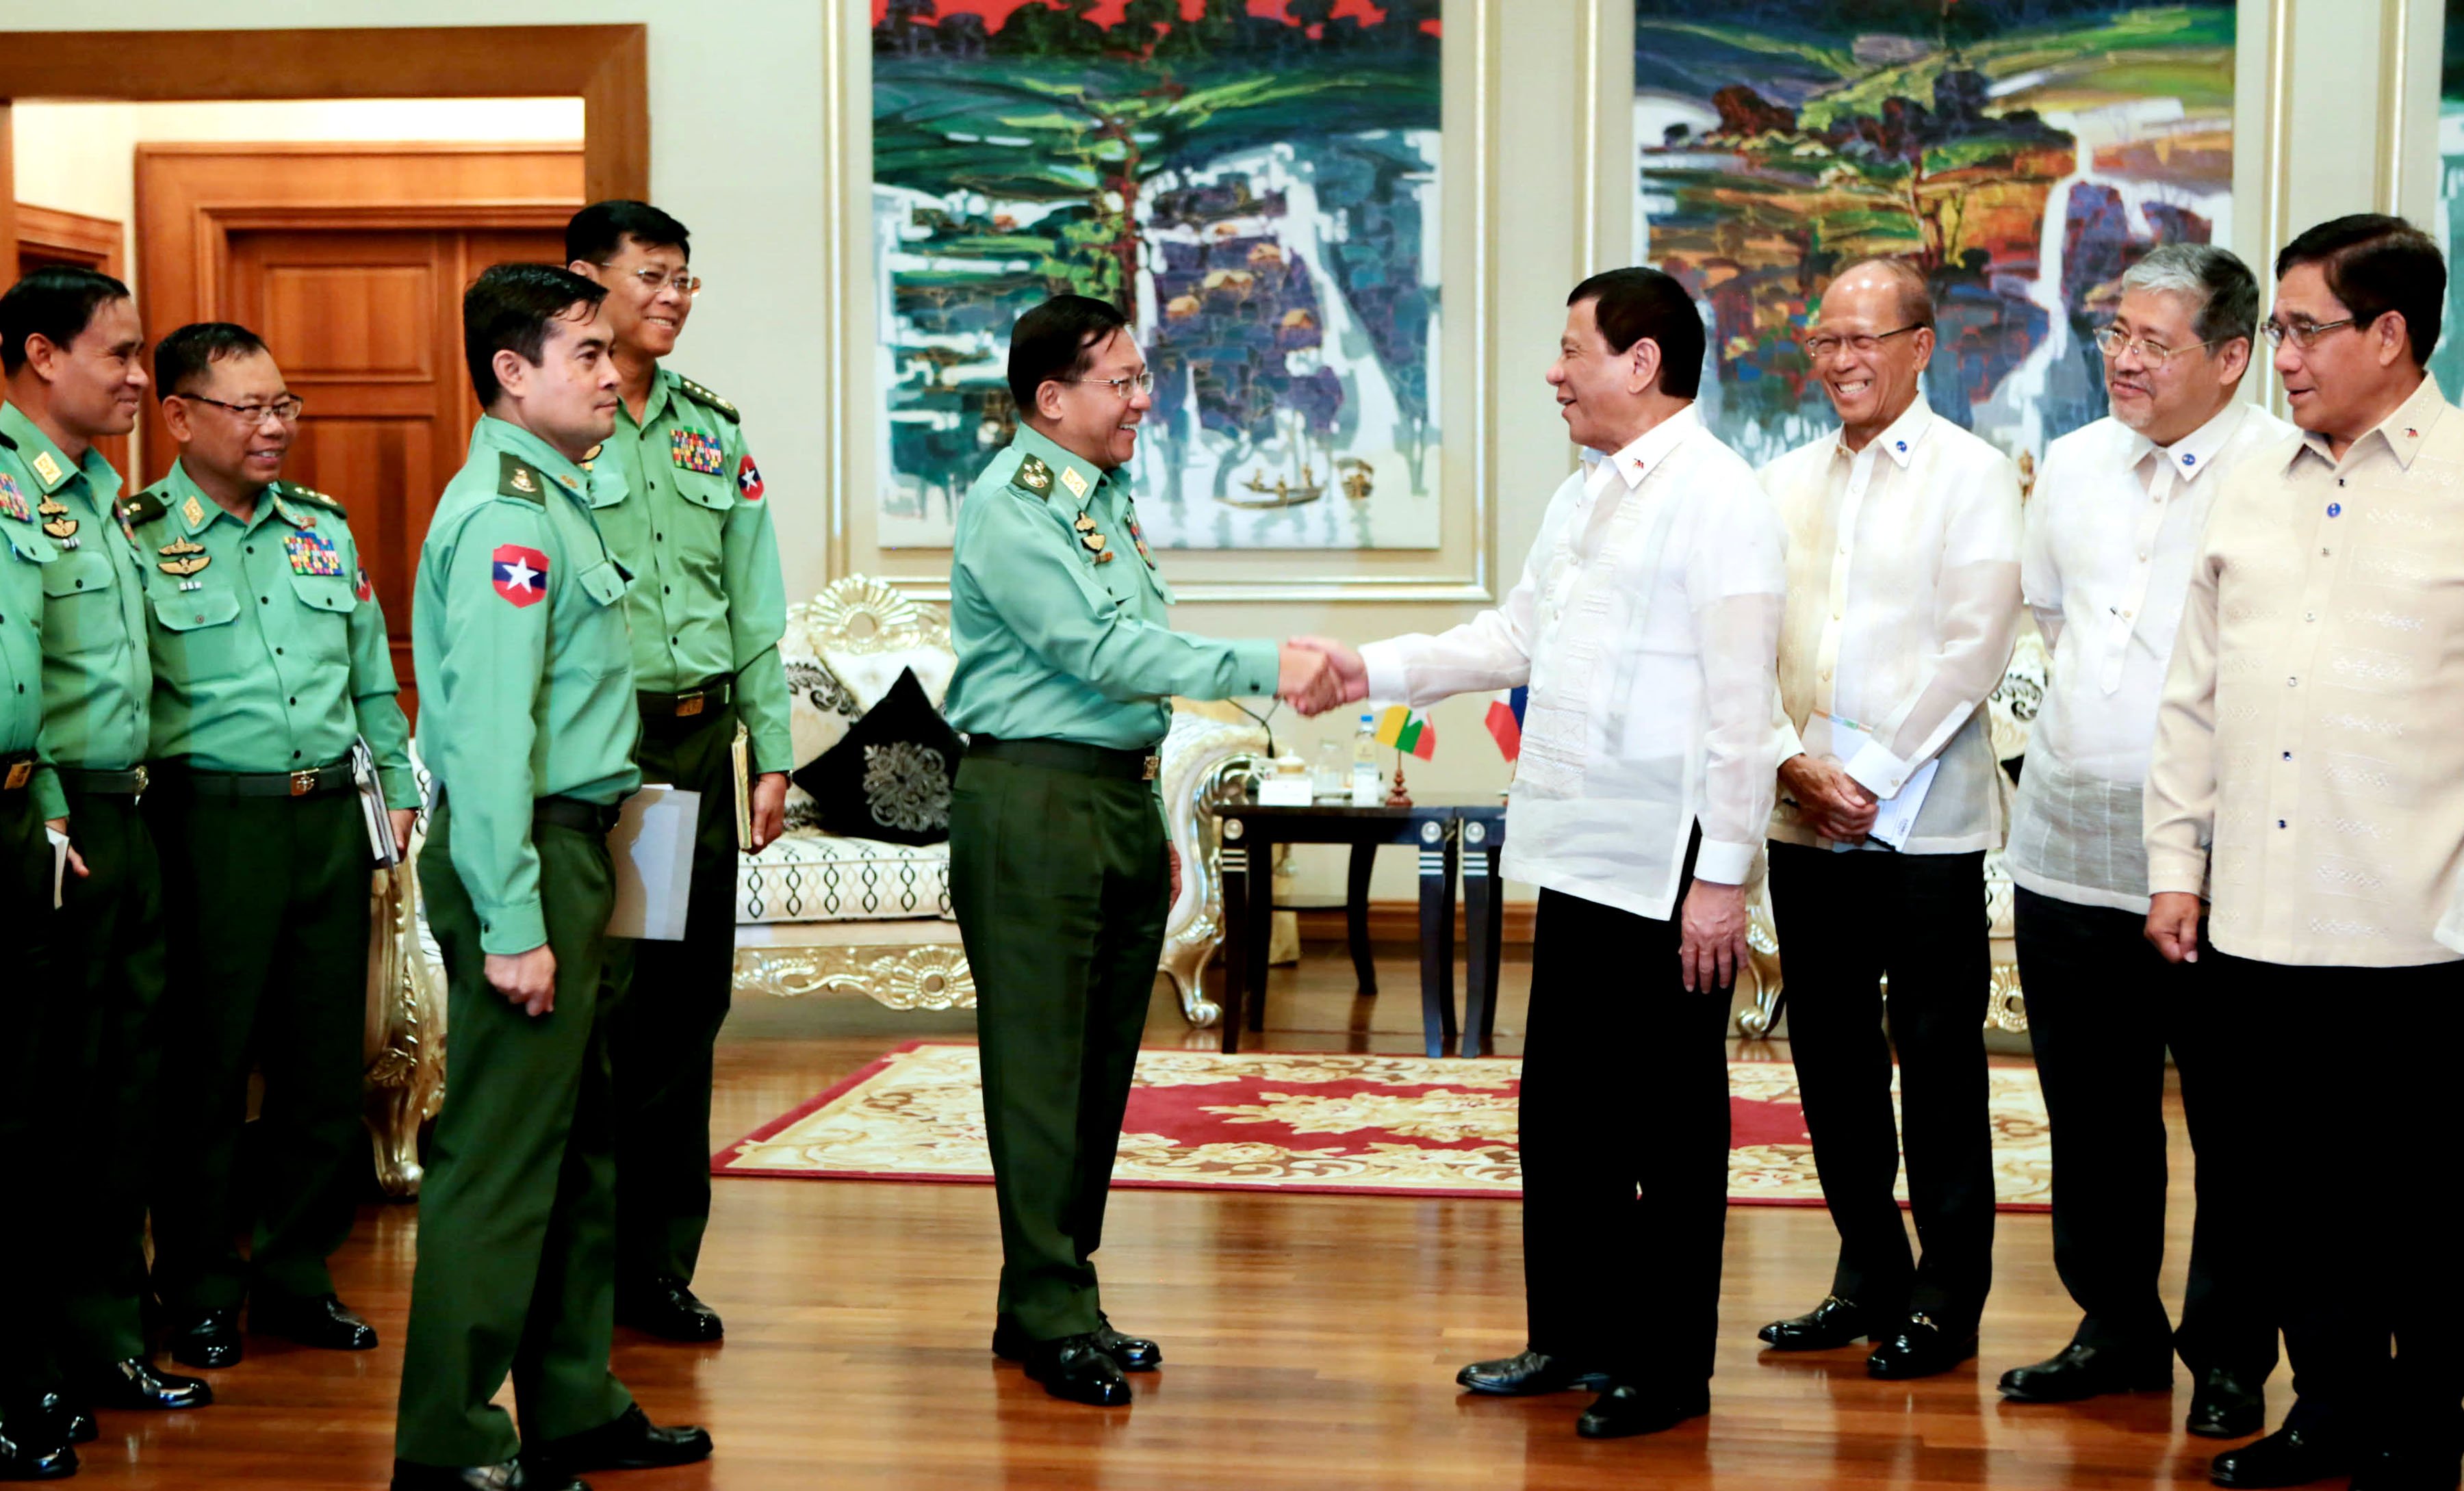 PRRD meets with Myanmar Commander-in-Chief Senior General Min Aung Hlaing at the Horizon Lake View Hotel in Nay Pyi Taw, Myanmar